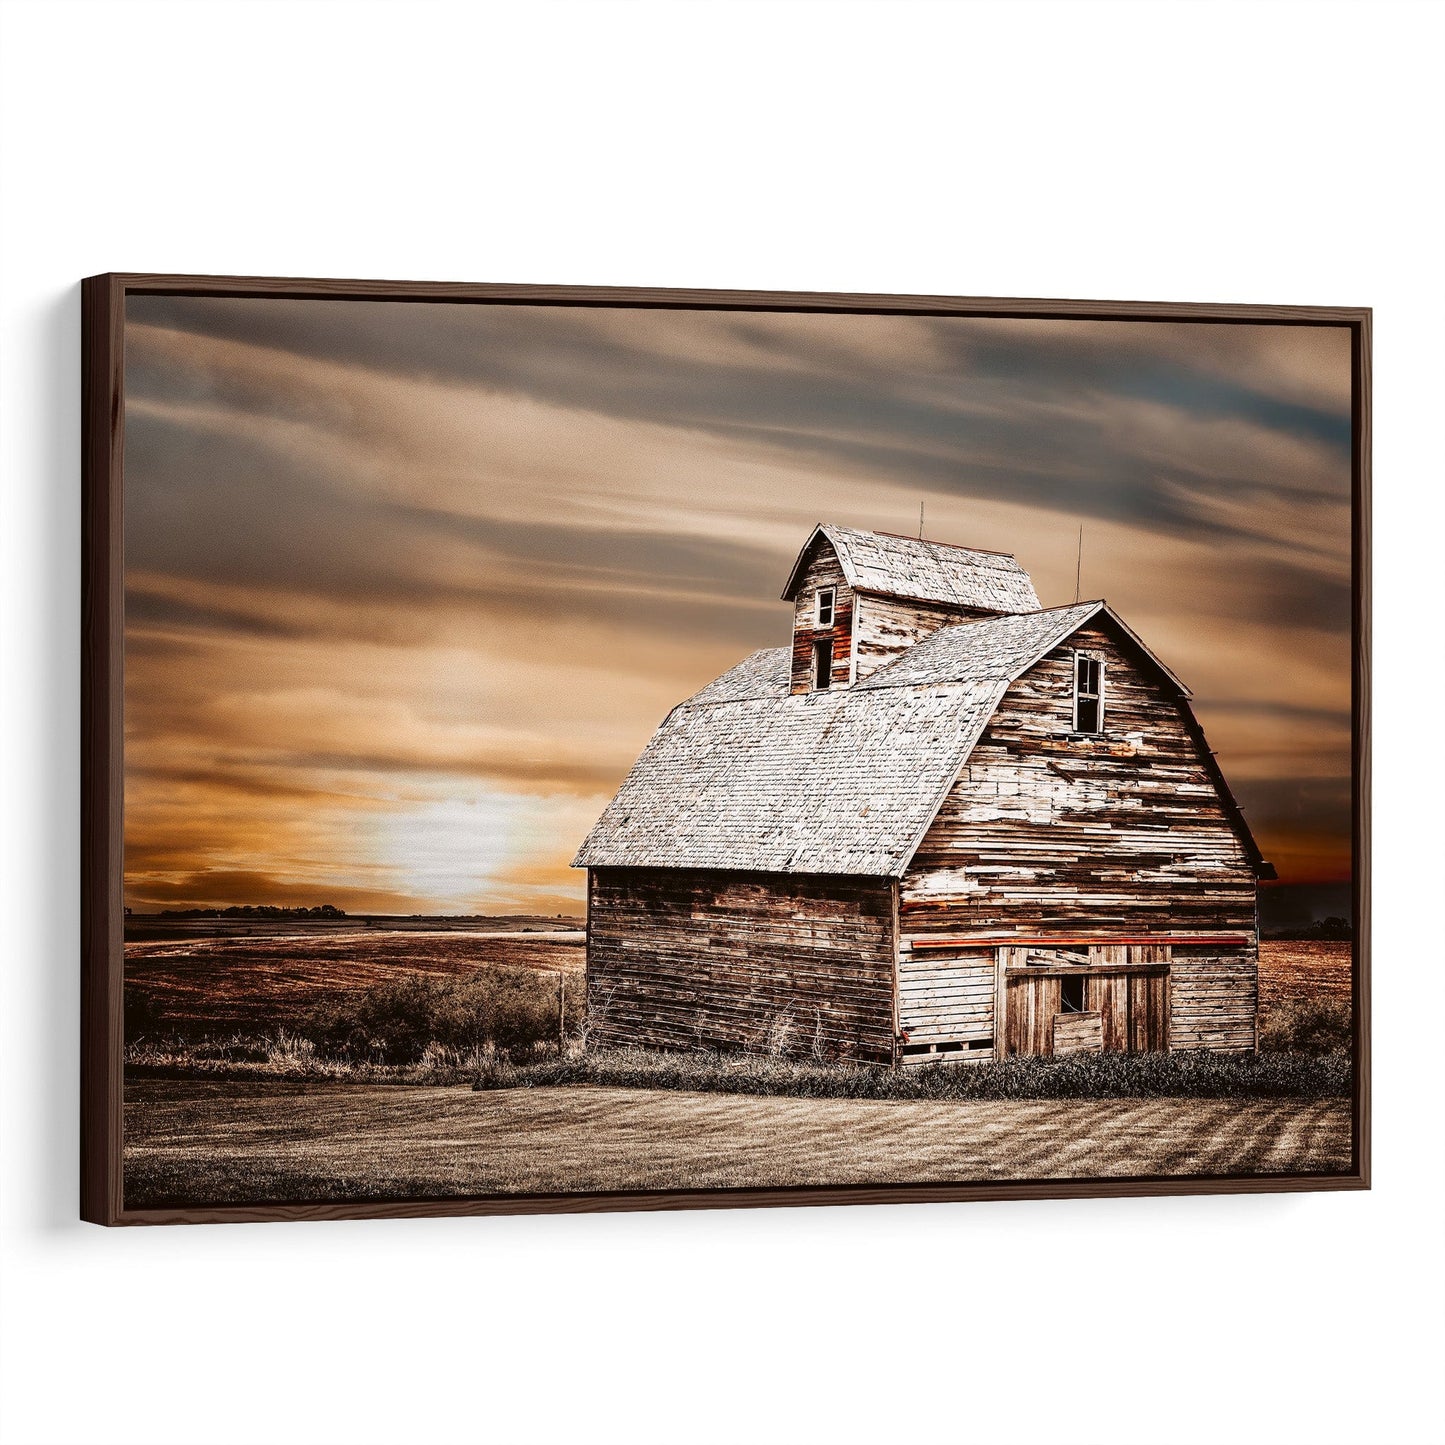 Rustic Old Barn and Sunset Photo Canvas-Walnut Frame / 12 x 18 Inches Wall Art Teri James Photography